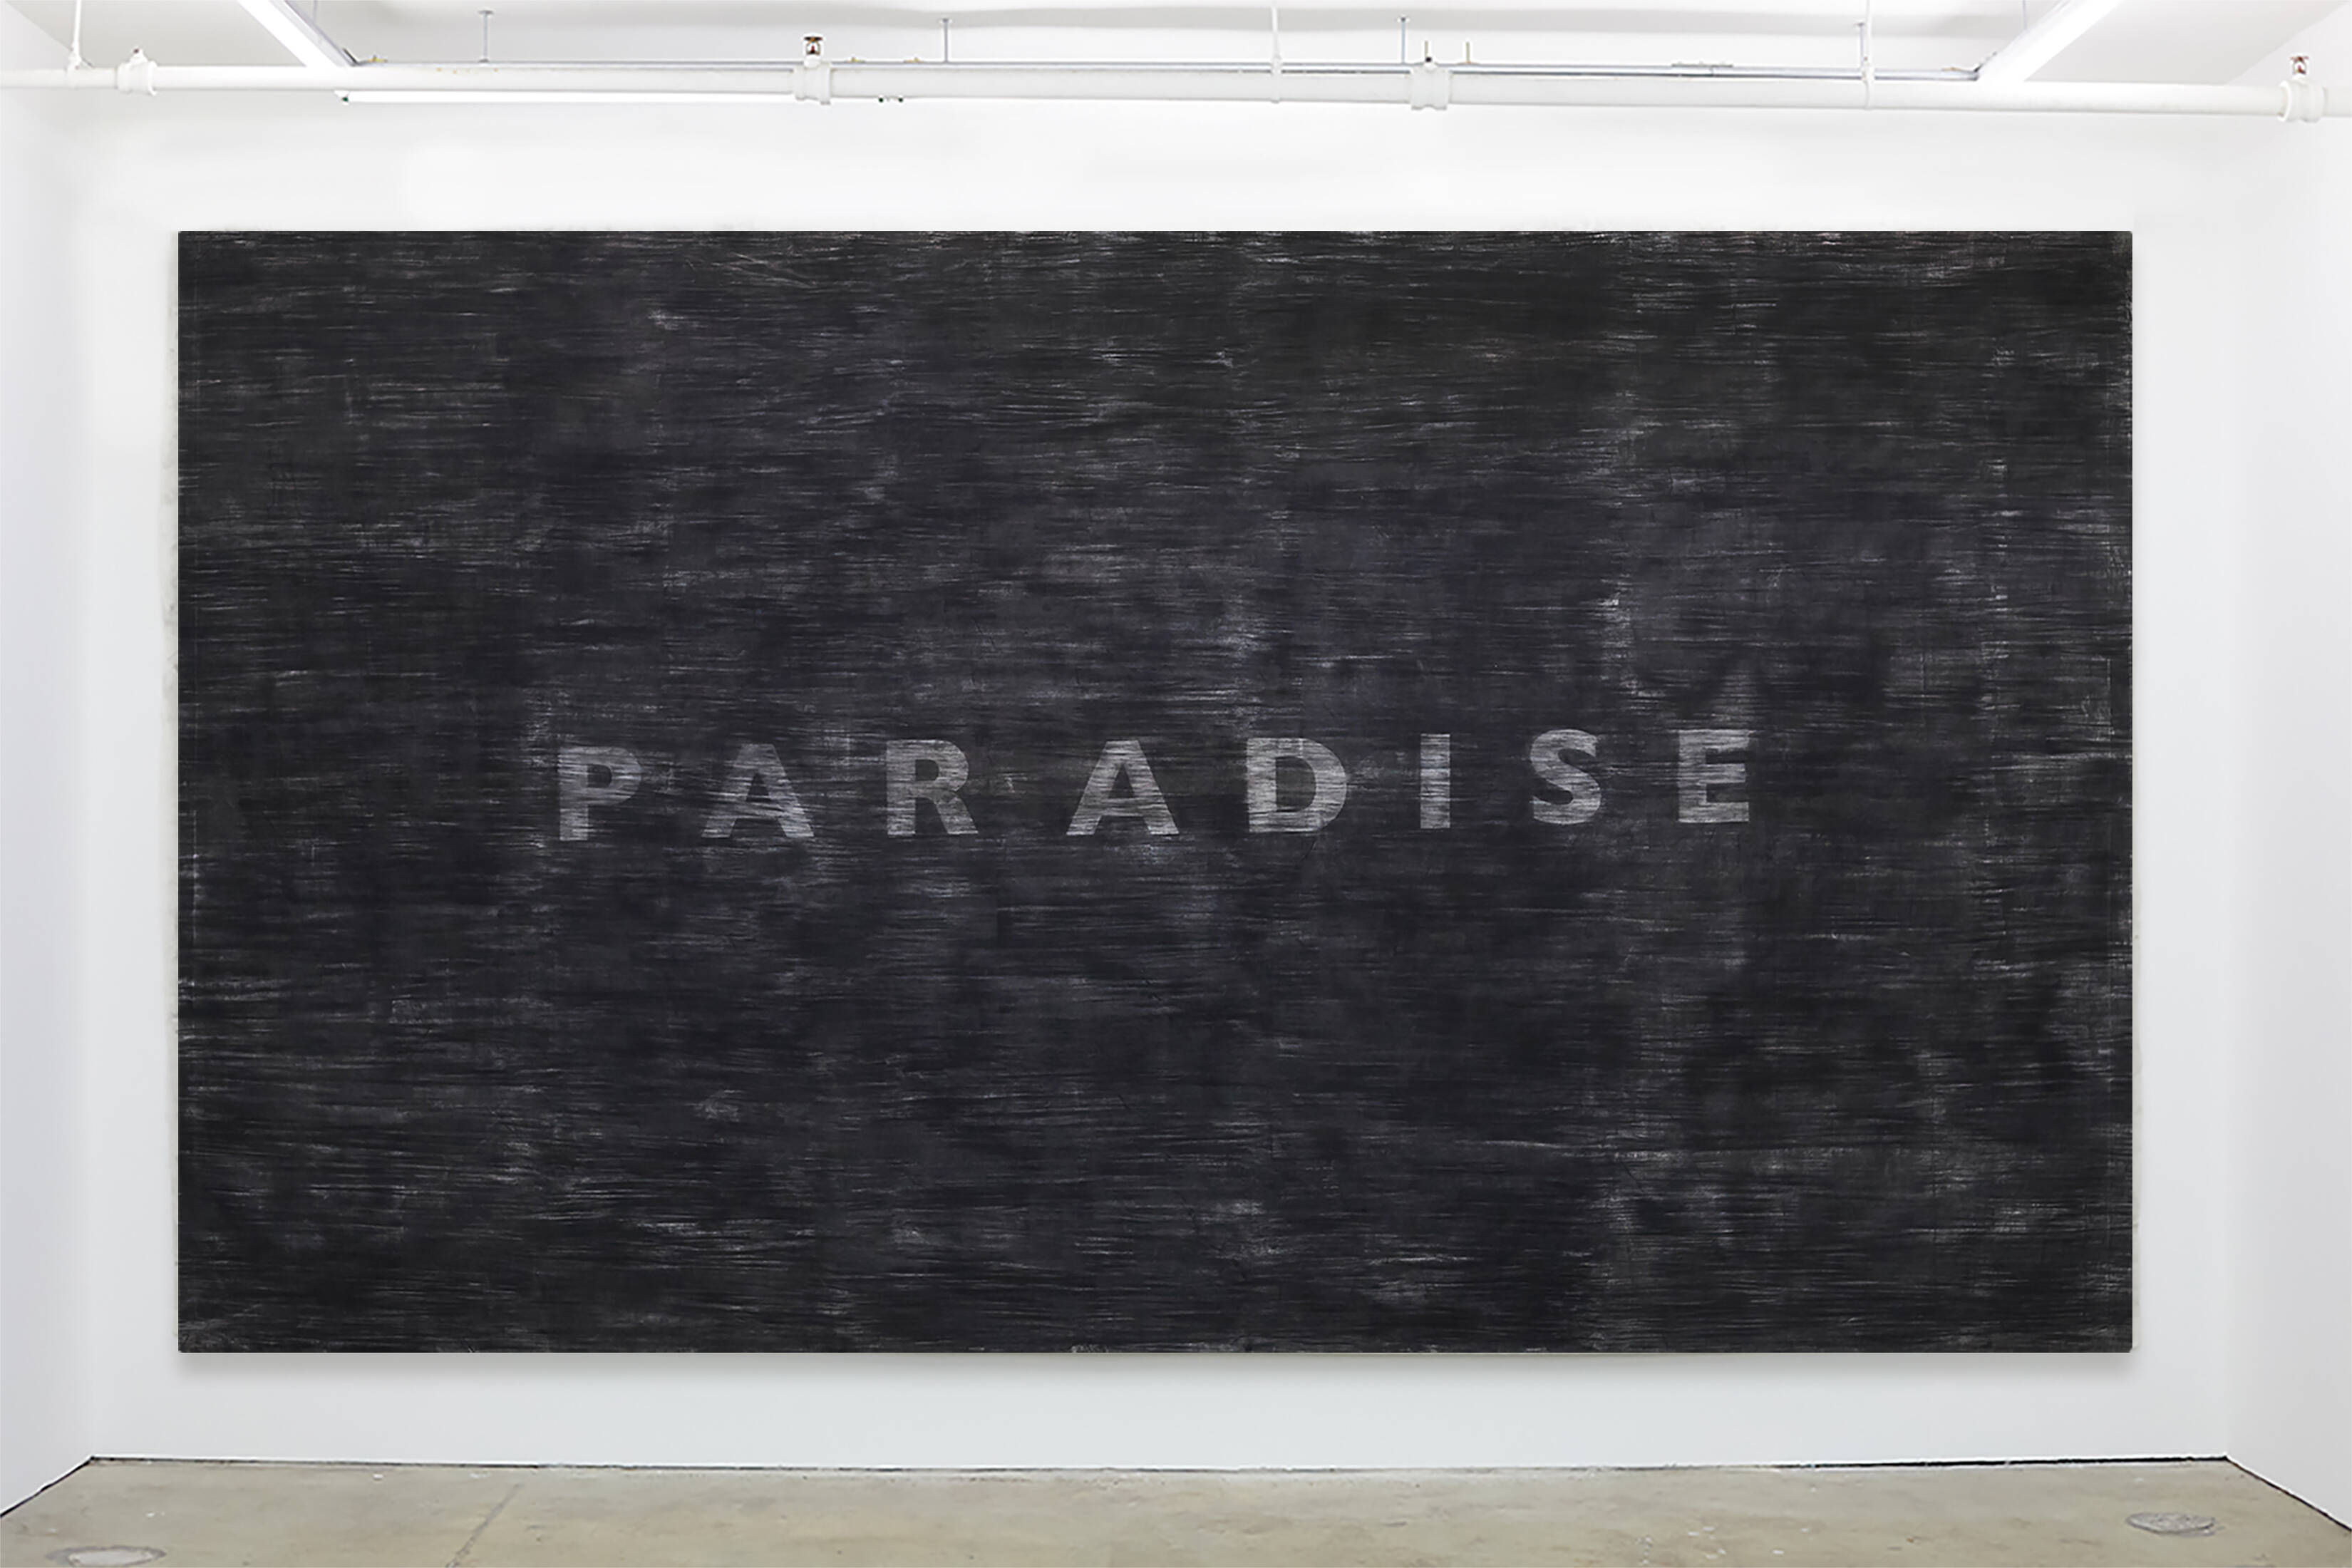 Carbon residue on muslin shows the word “paradise” in gray capital letters against a black background.